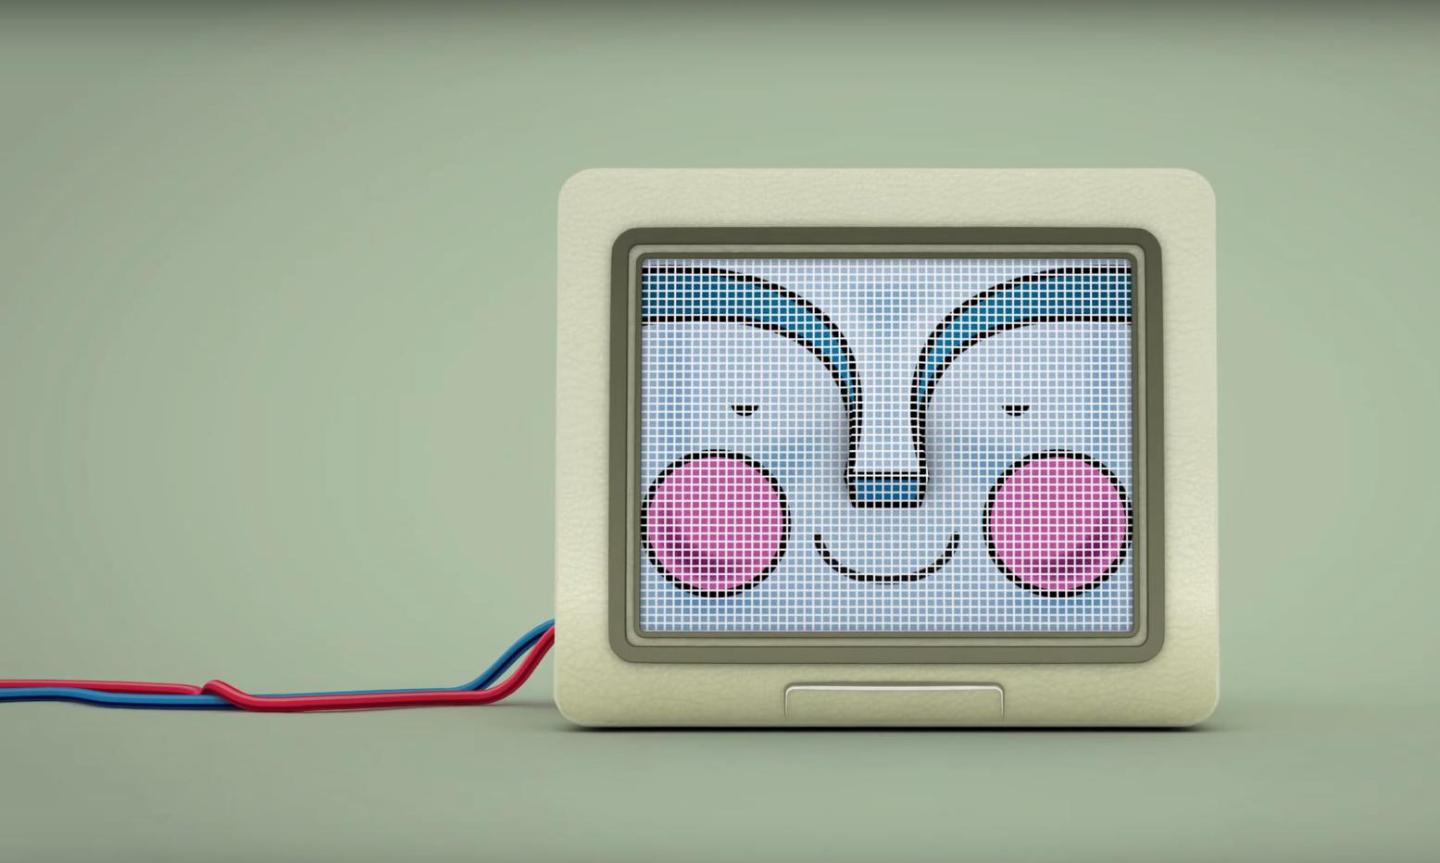 cathode ray computer screen displaying animated face